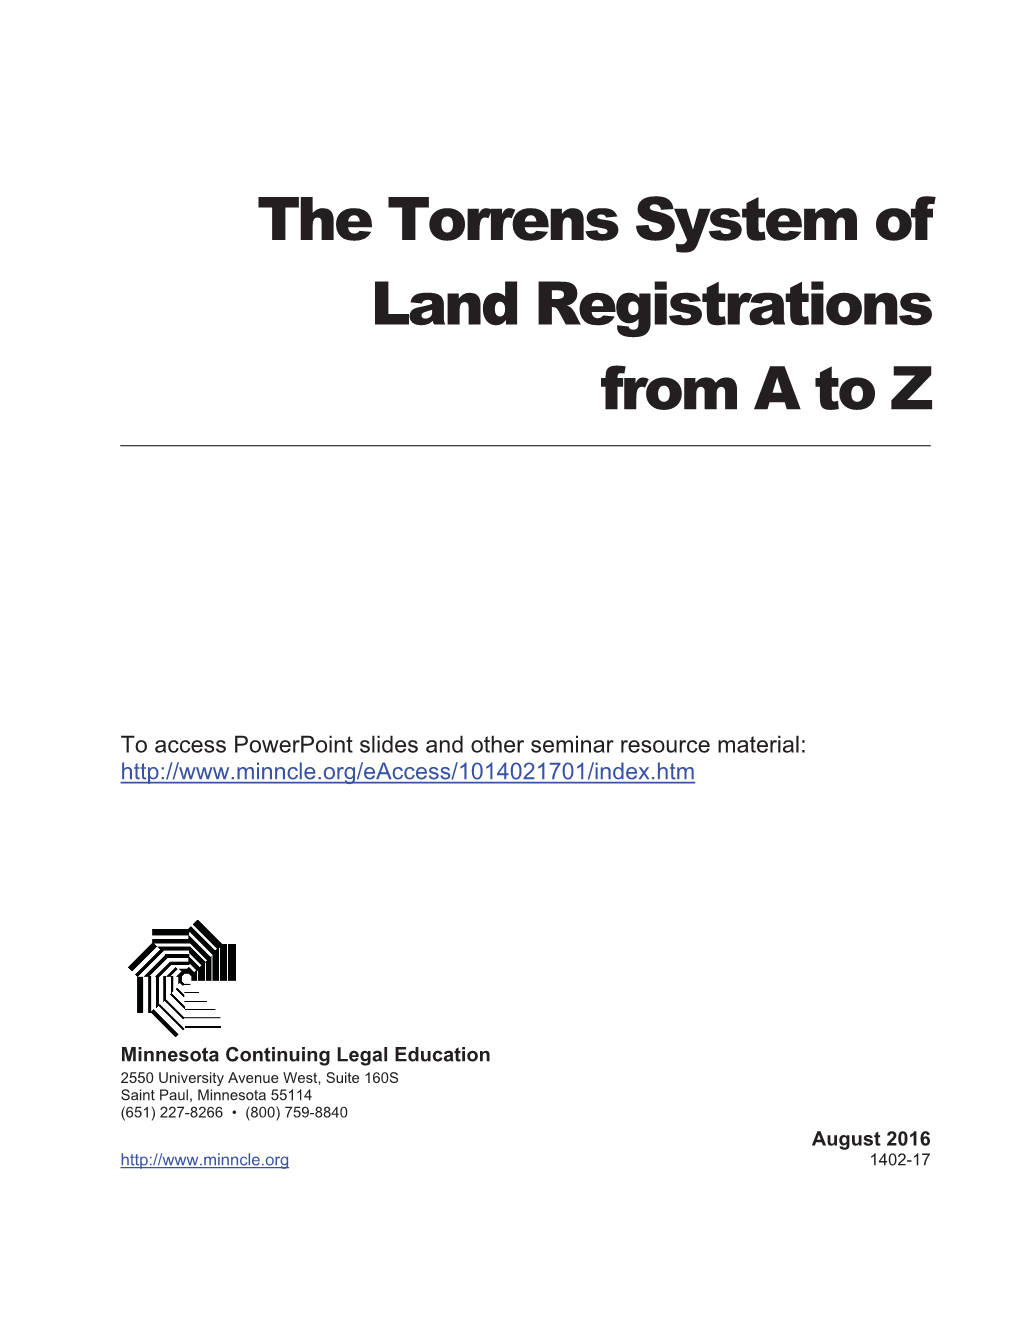 The Torrens System of Land Registrations from a to Z